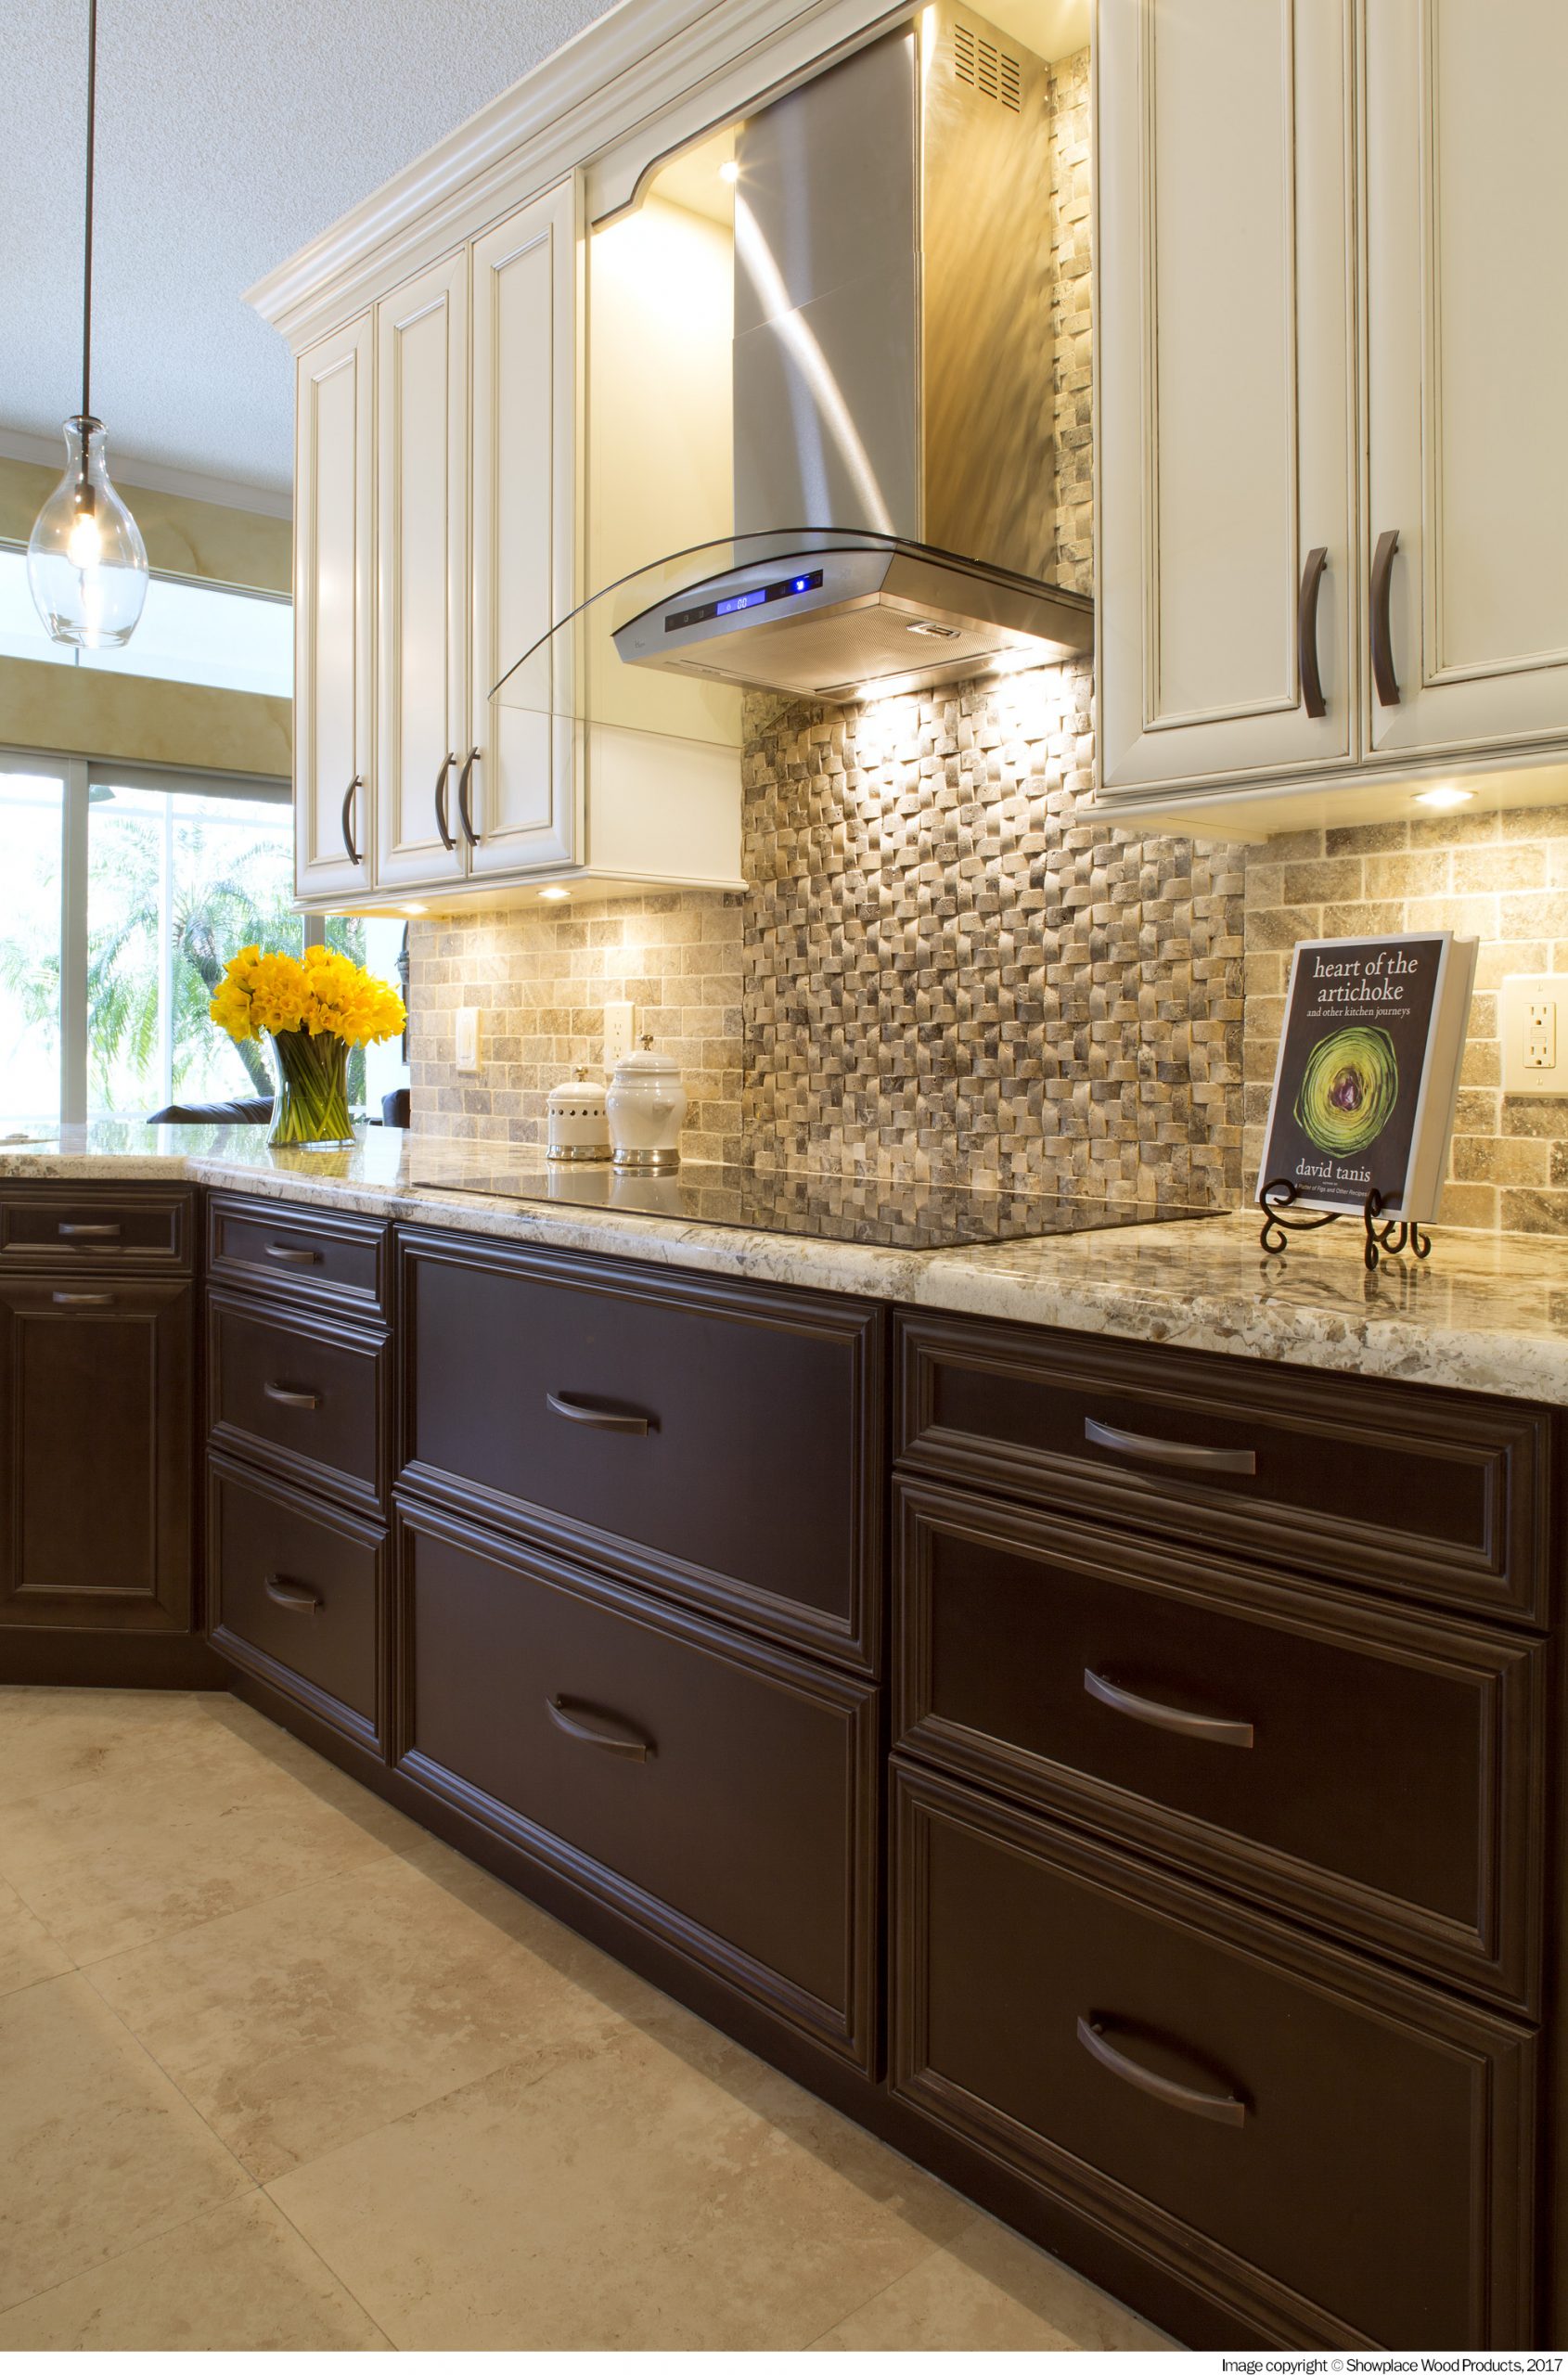 Showplace Cabinetry - Hub of the Home Kitchen